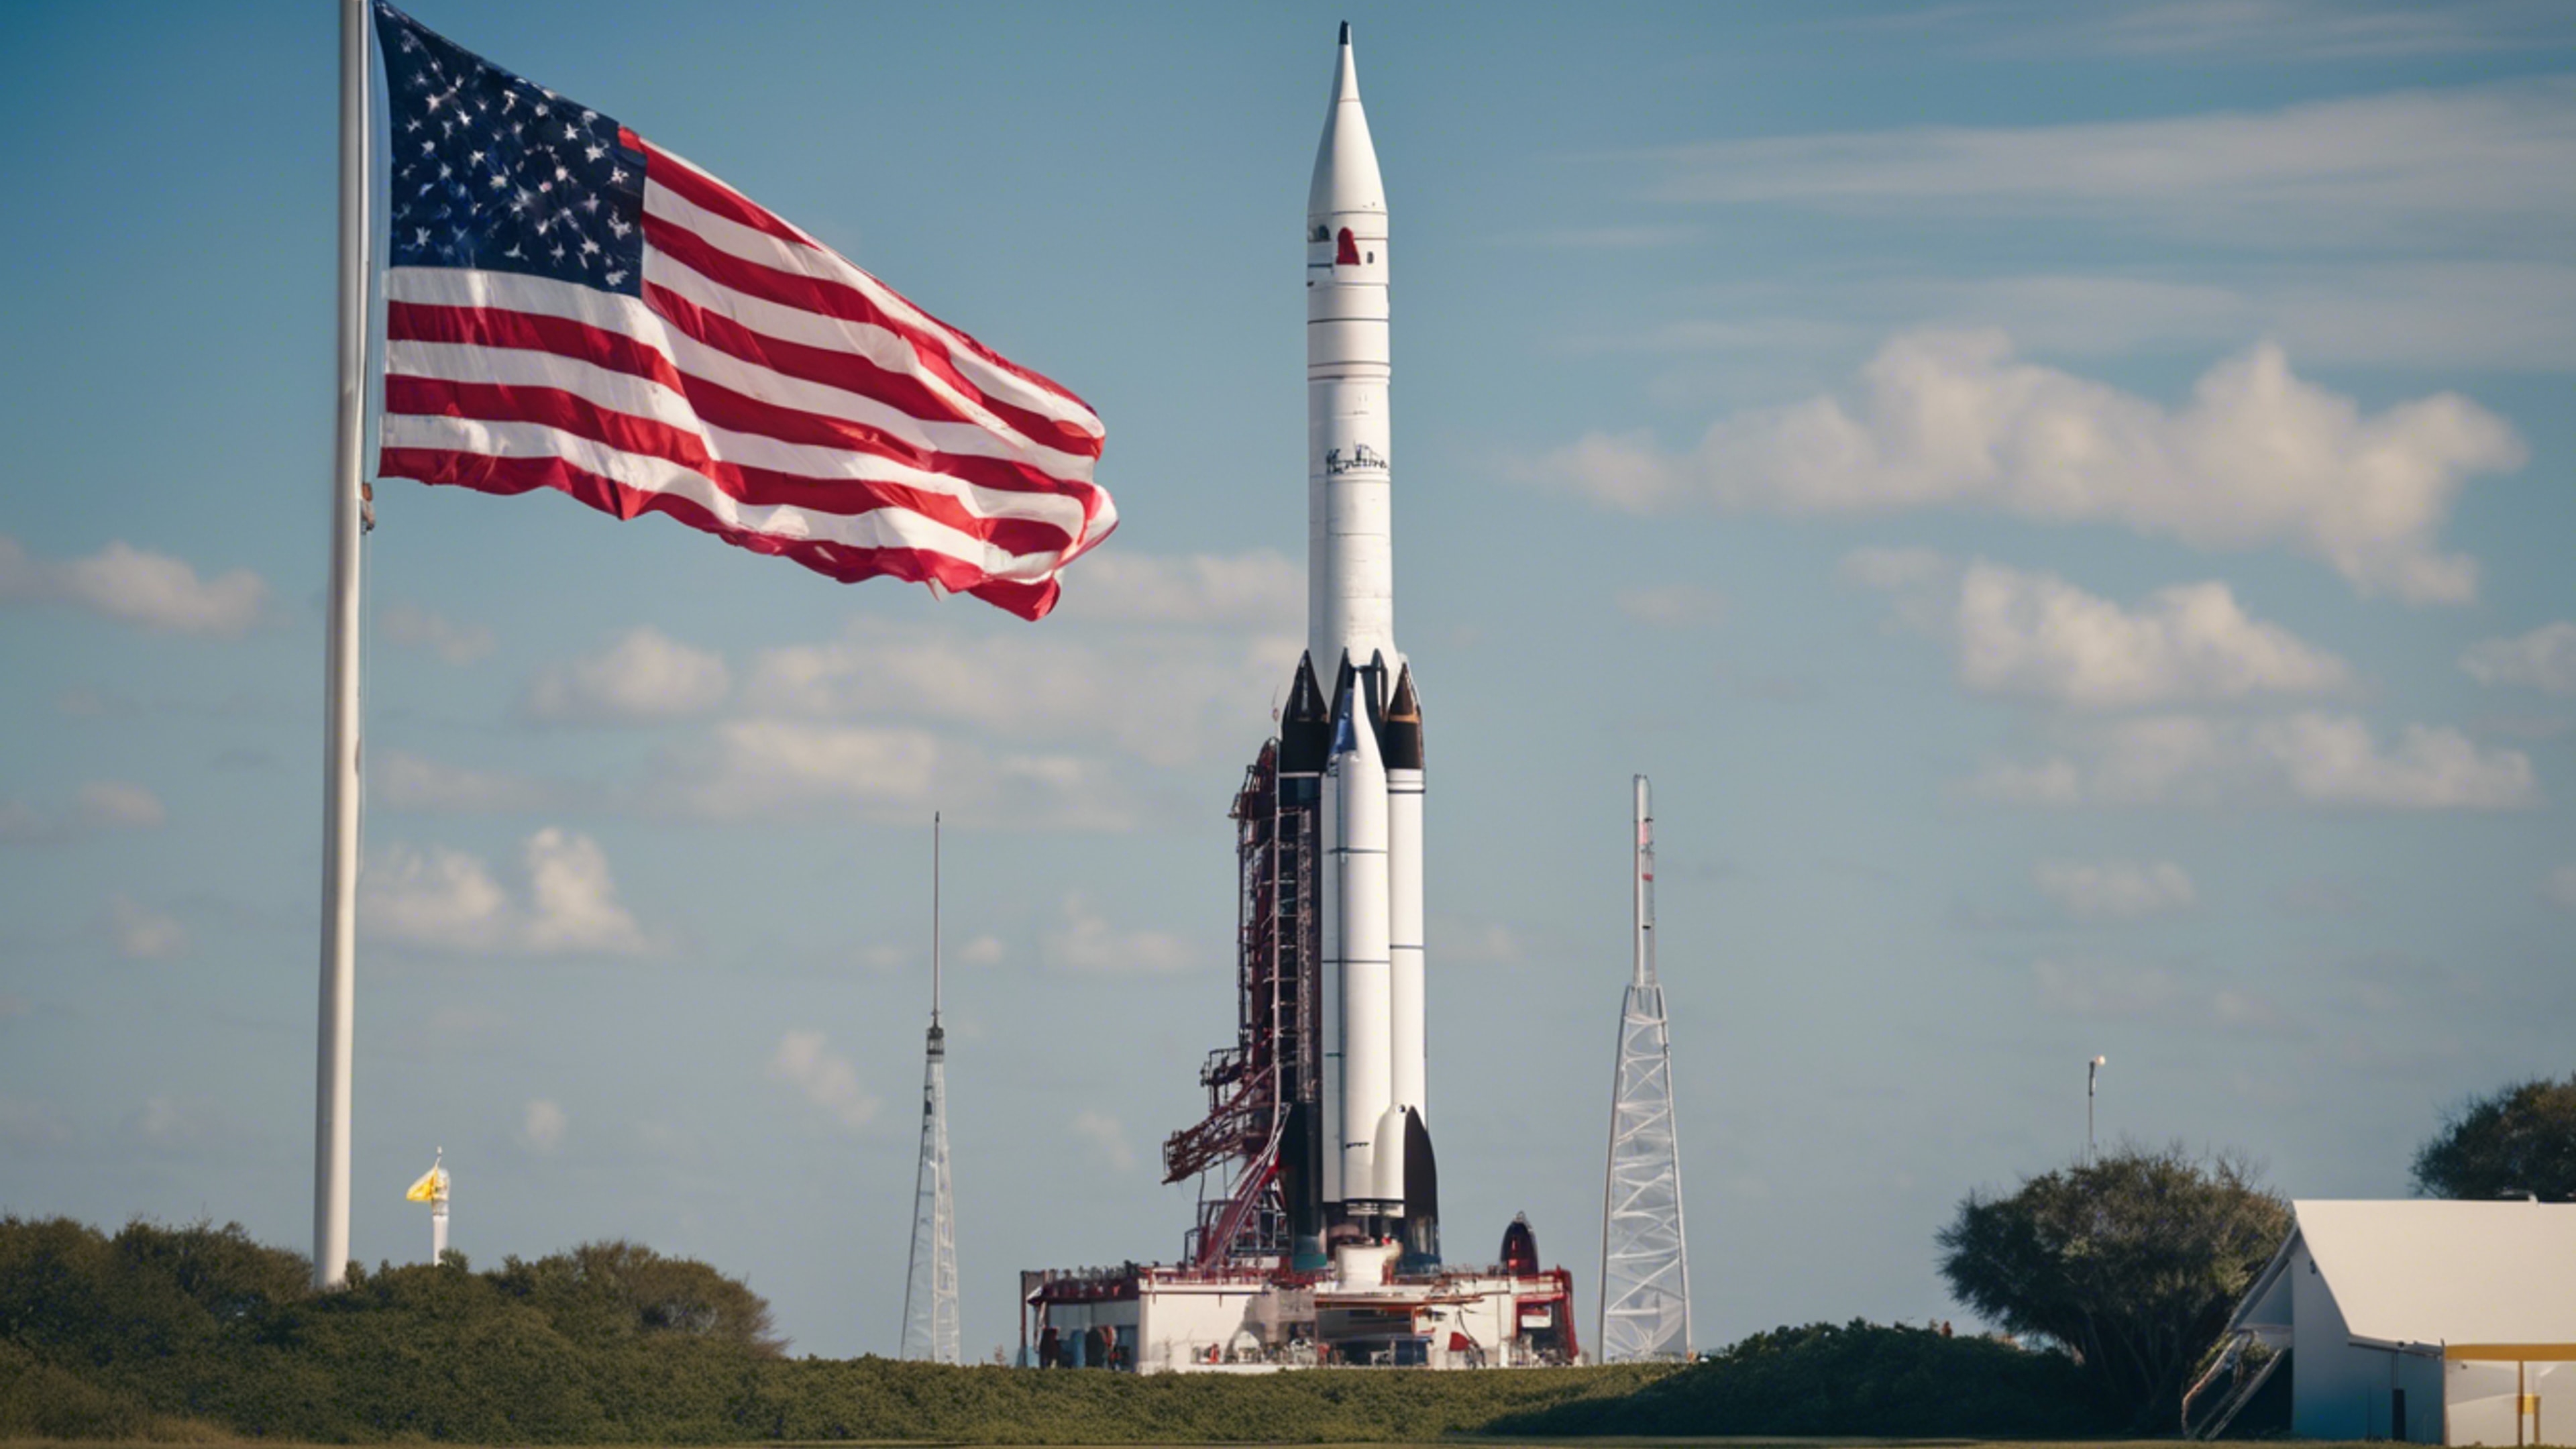 A historic rocket display at Cape Canaveral, with a clear blue sky and the American flag waving in the background. Tapeta na zeď[7e3199d5ab33424fb953]